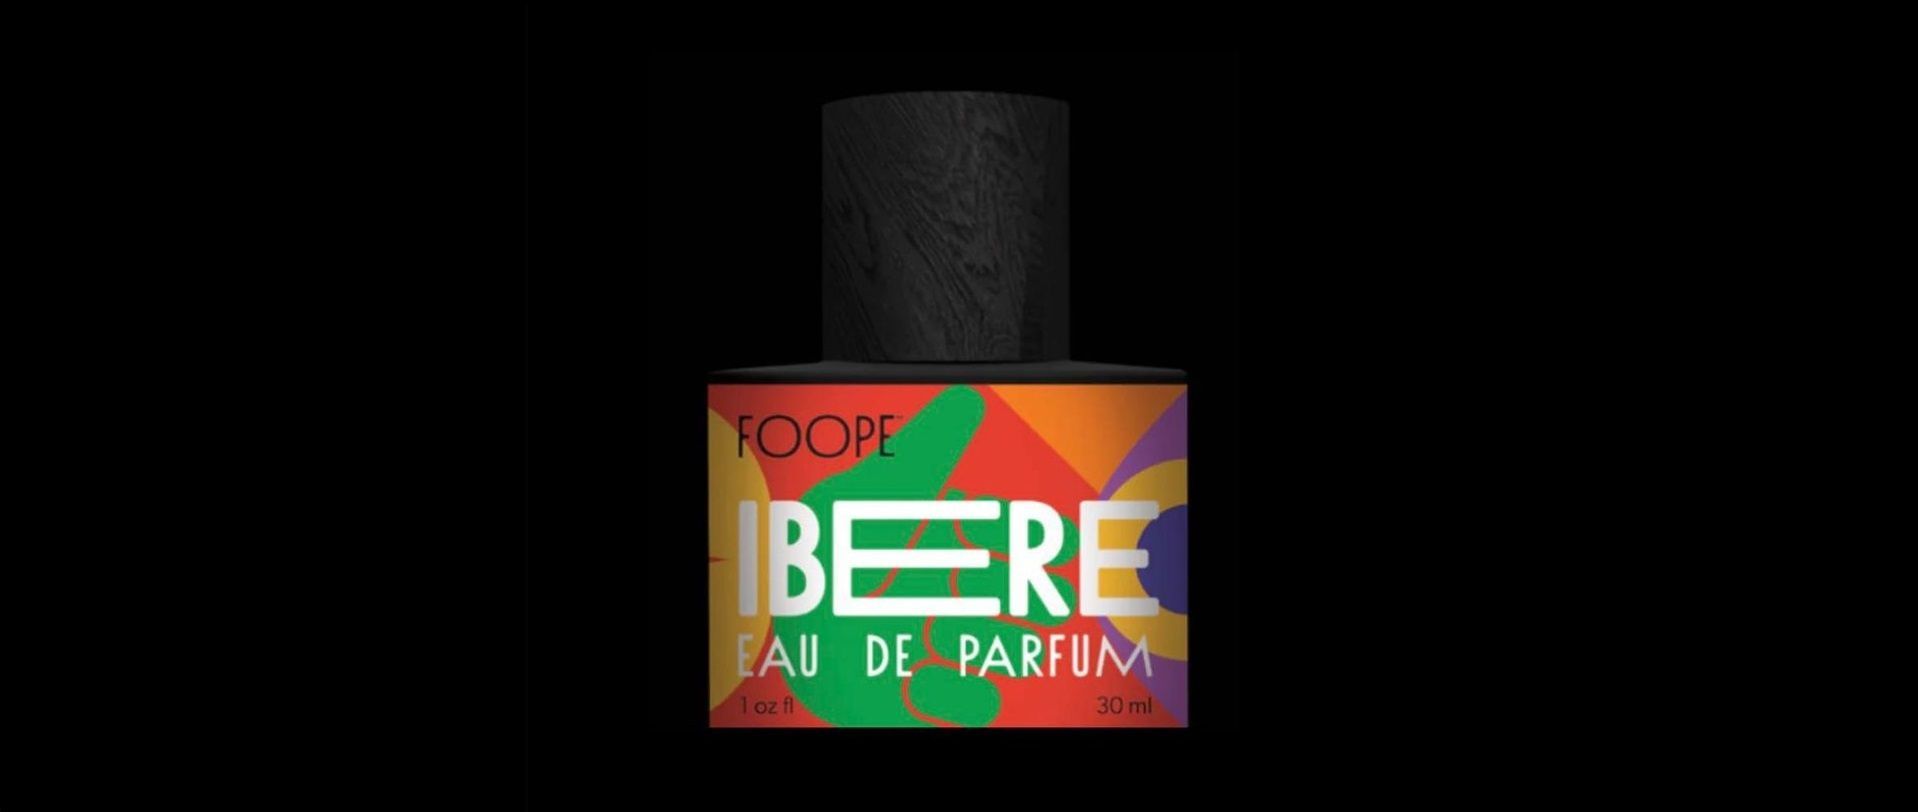 A colorful bottle of perfume called ibere